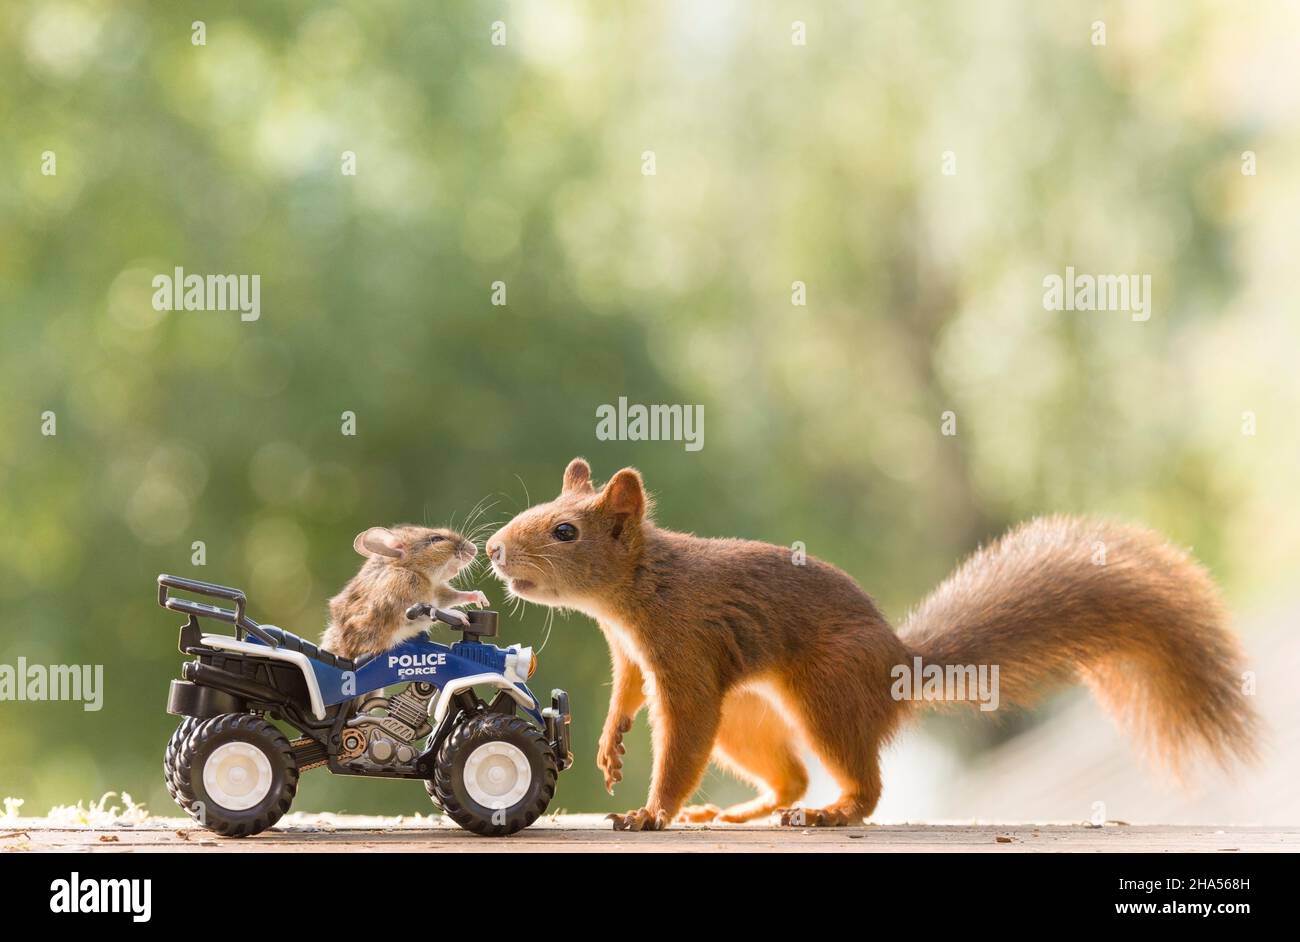 mouse is sitting on a police bike with a squirrel watching Stock Photo